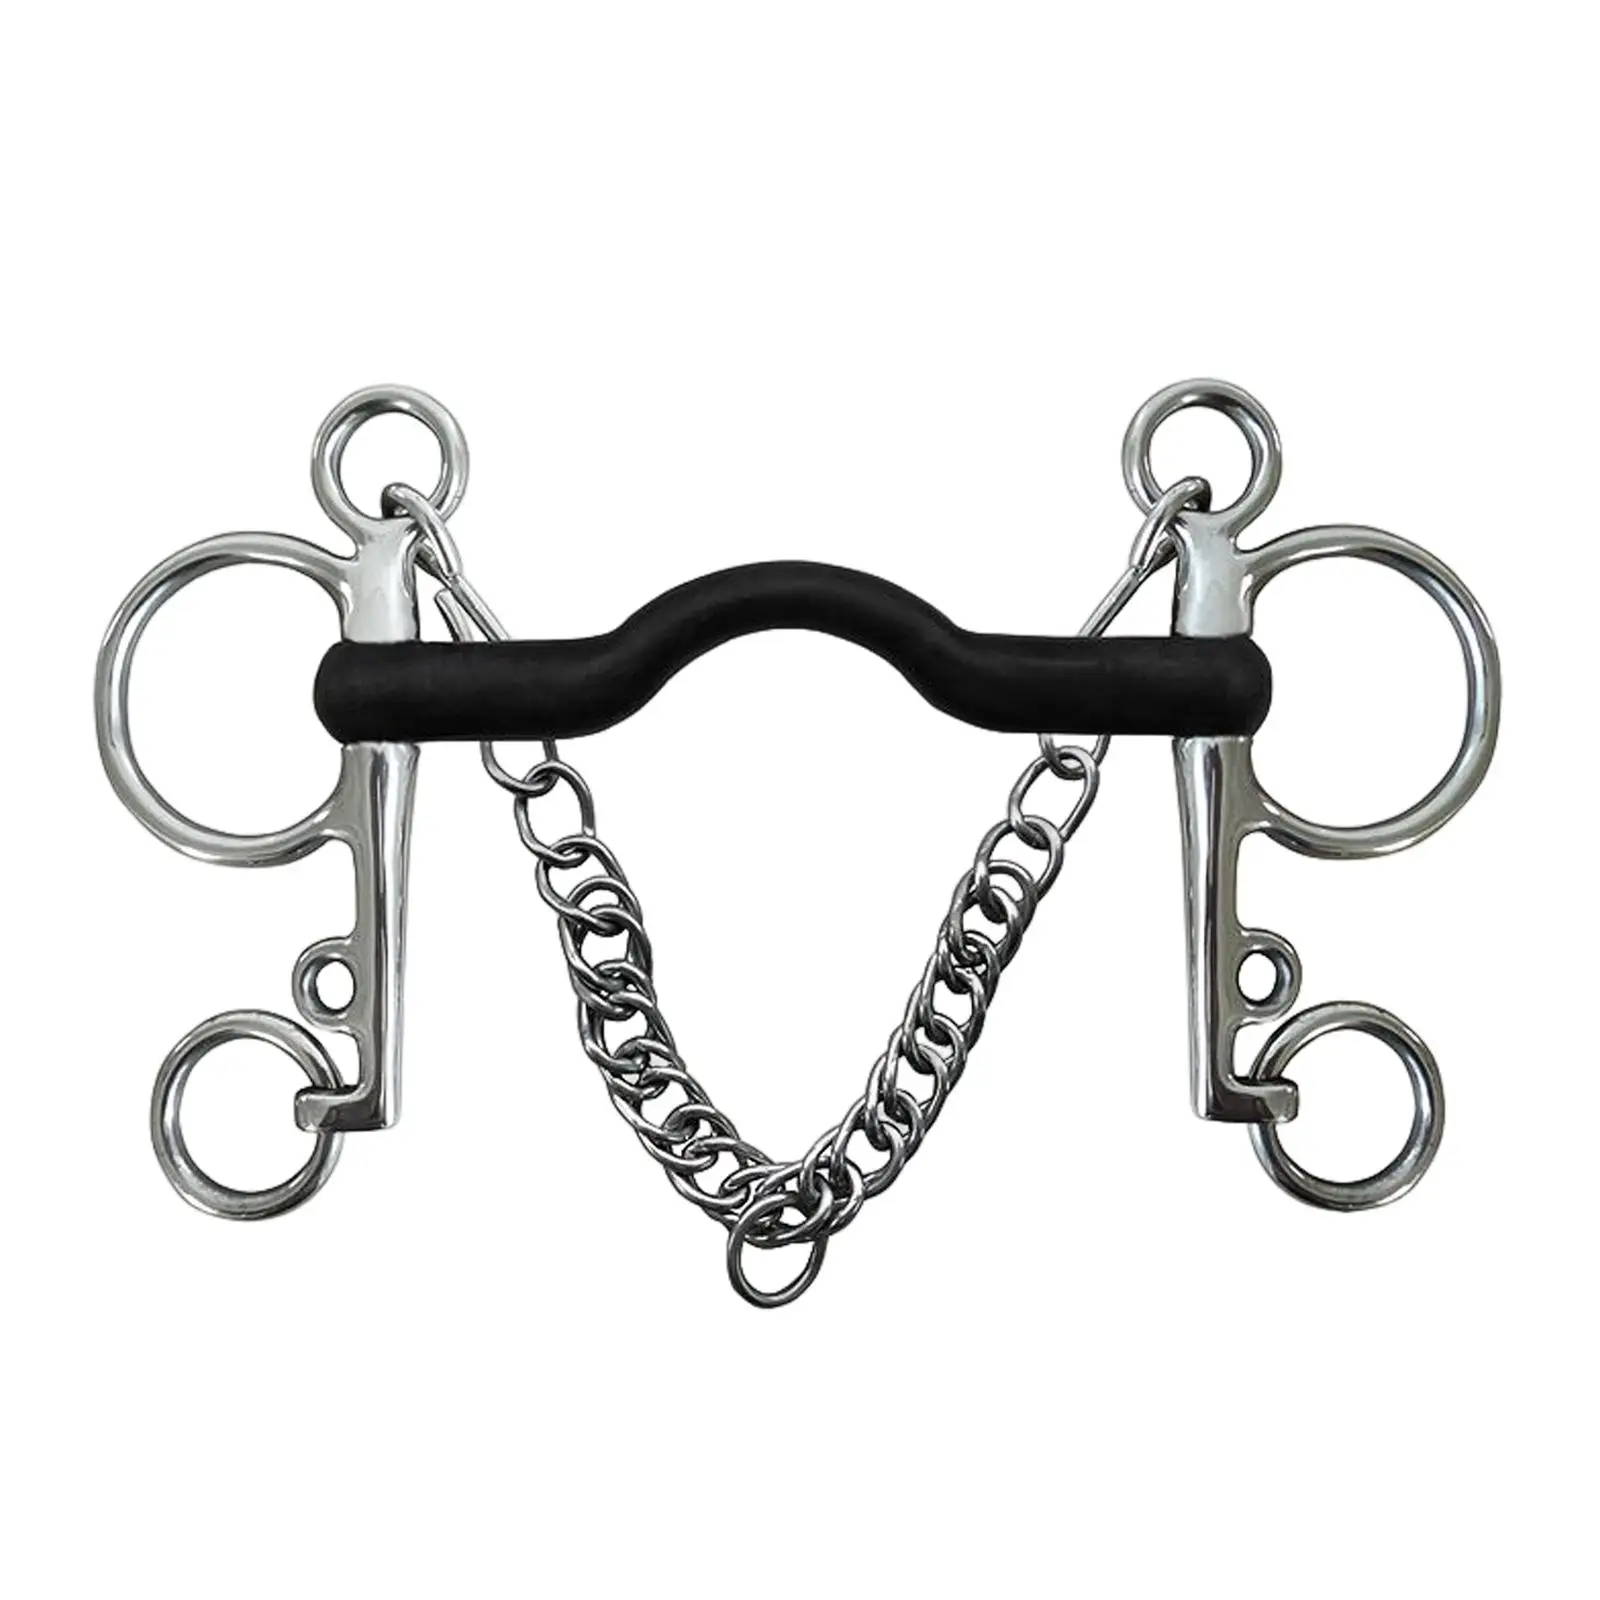 Western Style Horse Bit W/Curb Hooks Chain Horse Bit Mouth with Trims Cheek for Horse Bridle Training Equipment